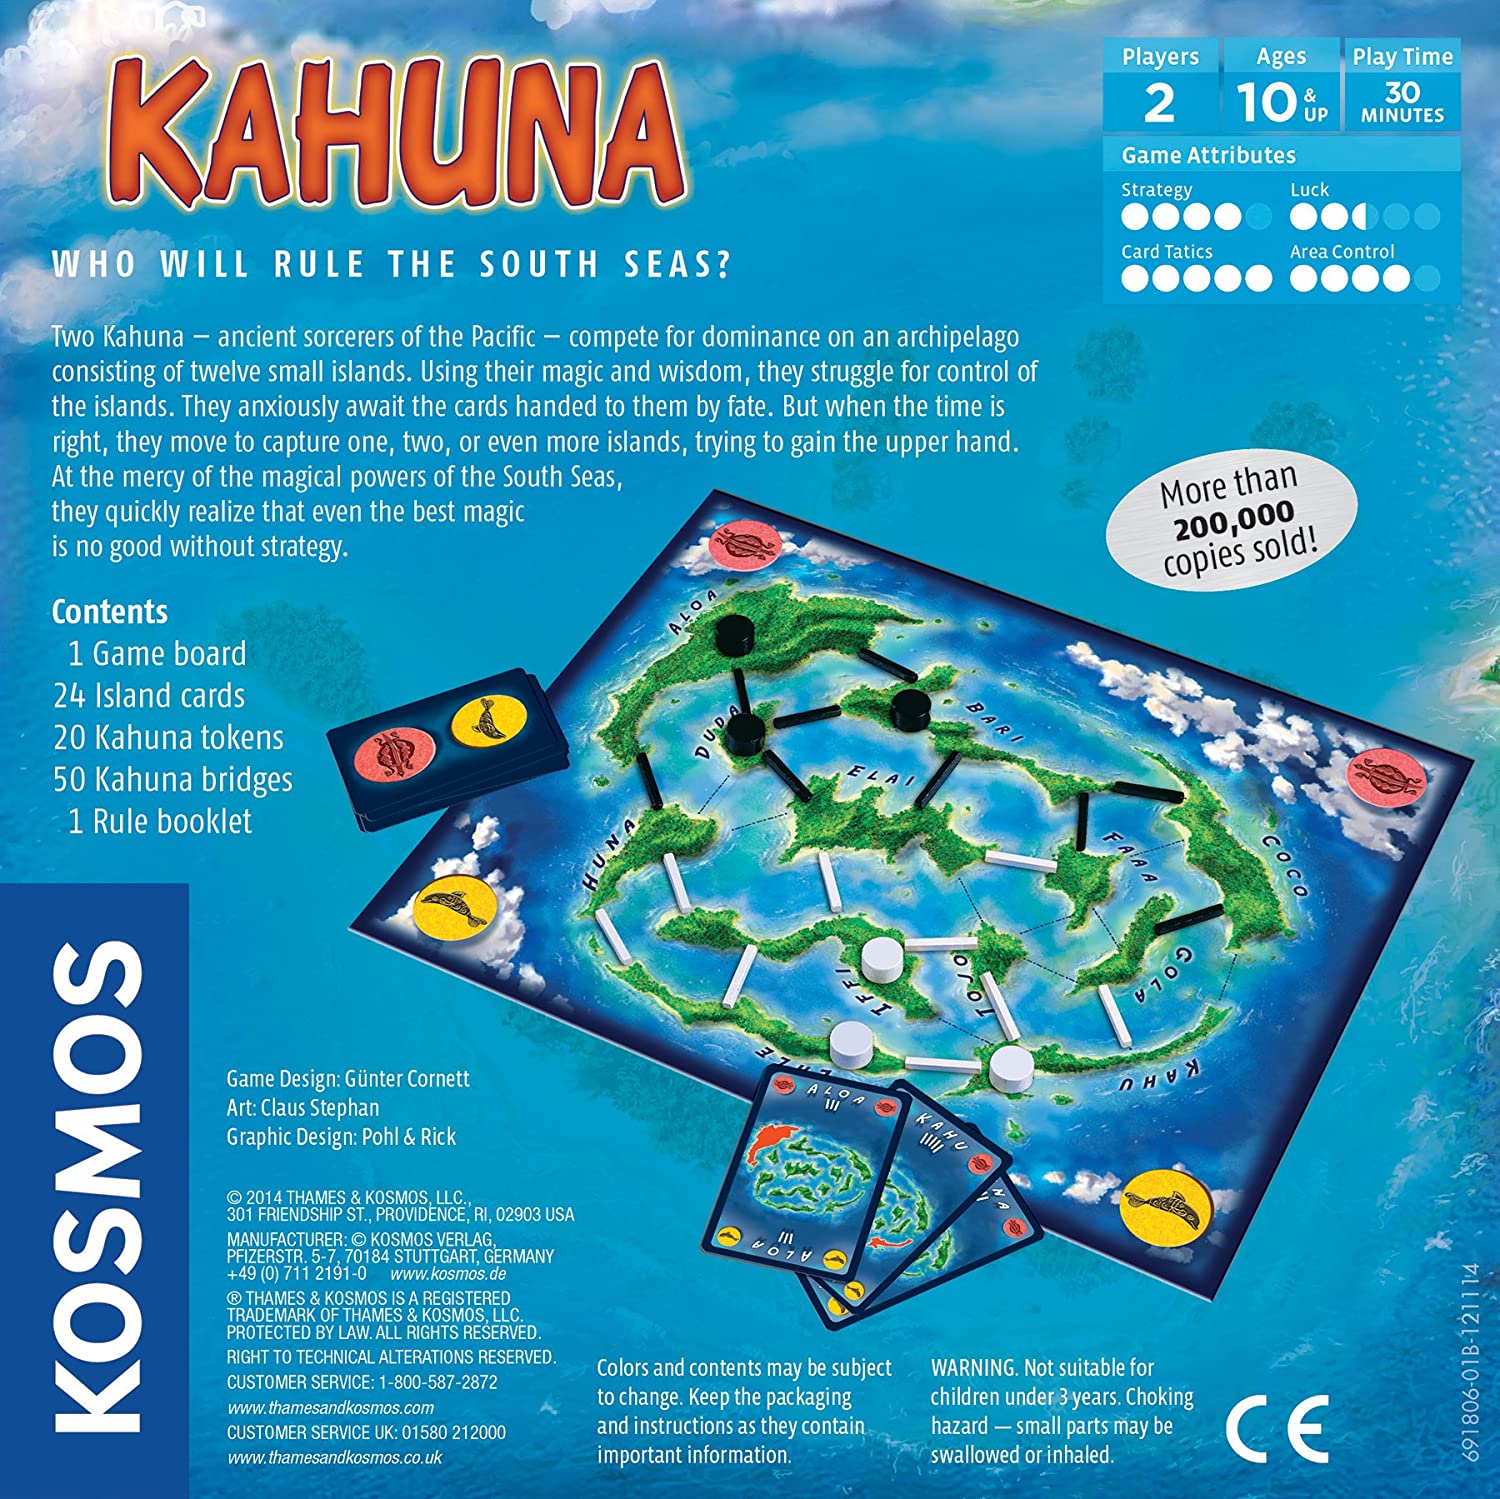 Find out about Kahuna